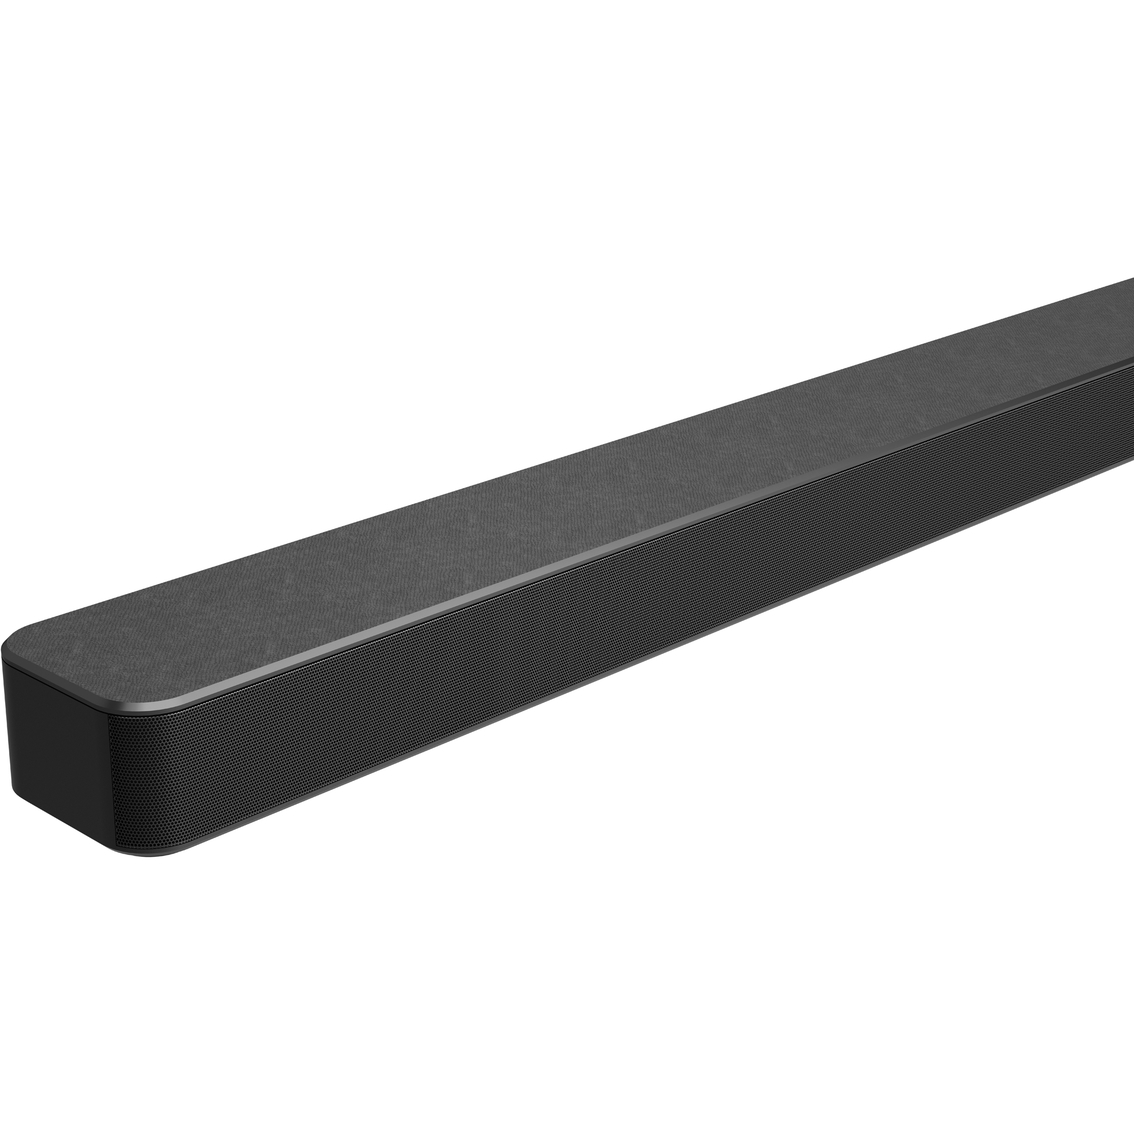 LG SN6Y 3.1 Channel 420 Watt High Res Audio Sound Bar with DTS Virtual:X - Image 5 of 10